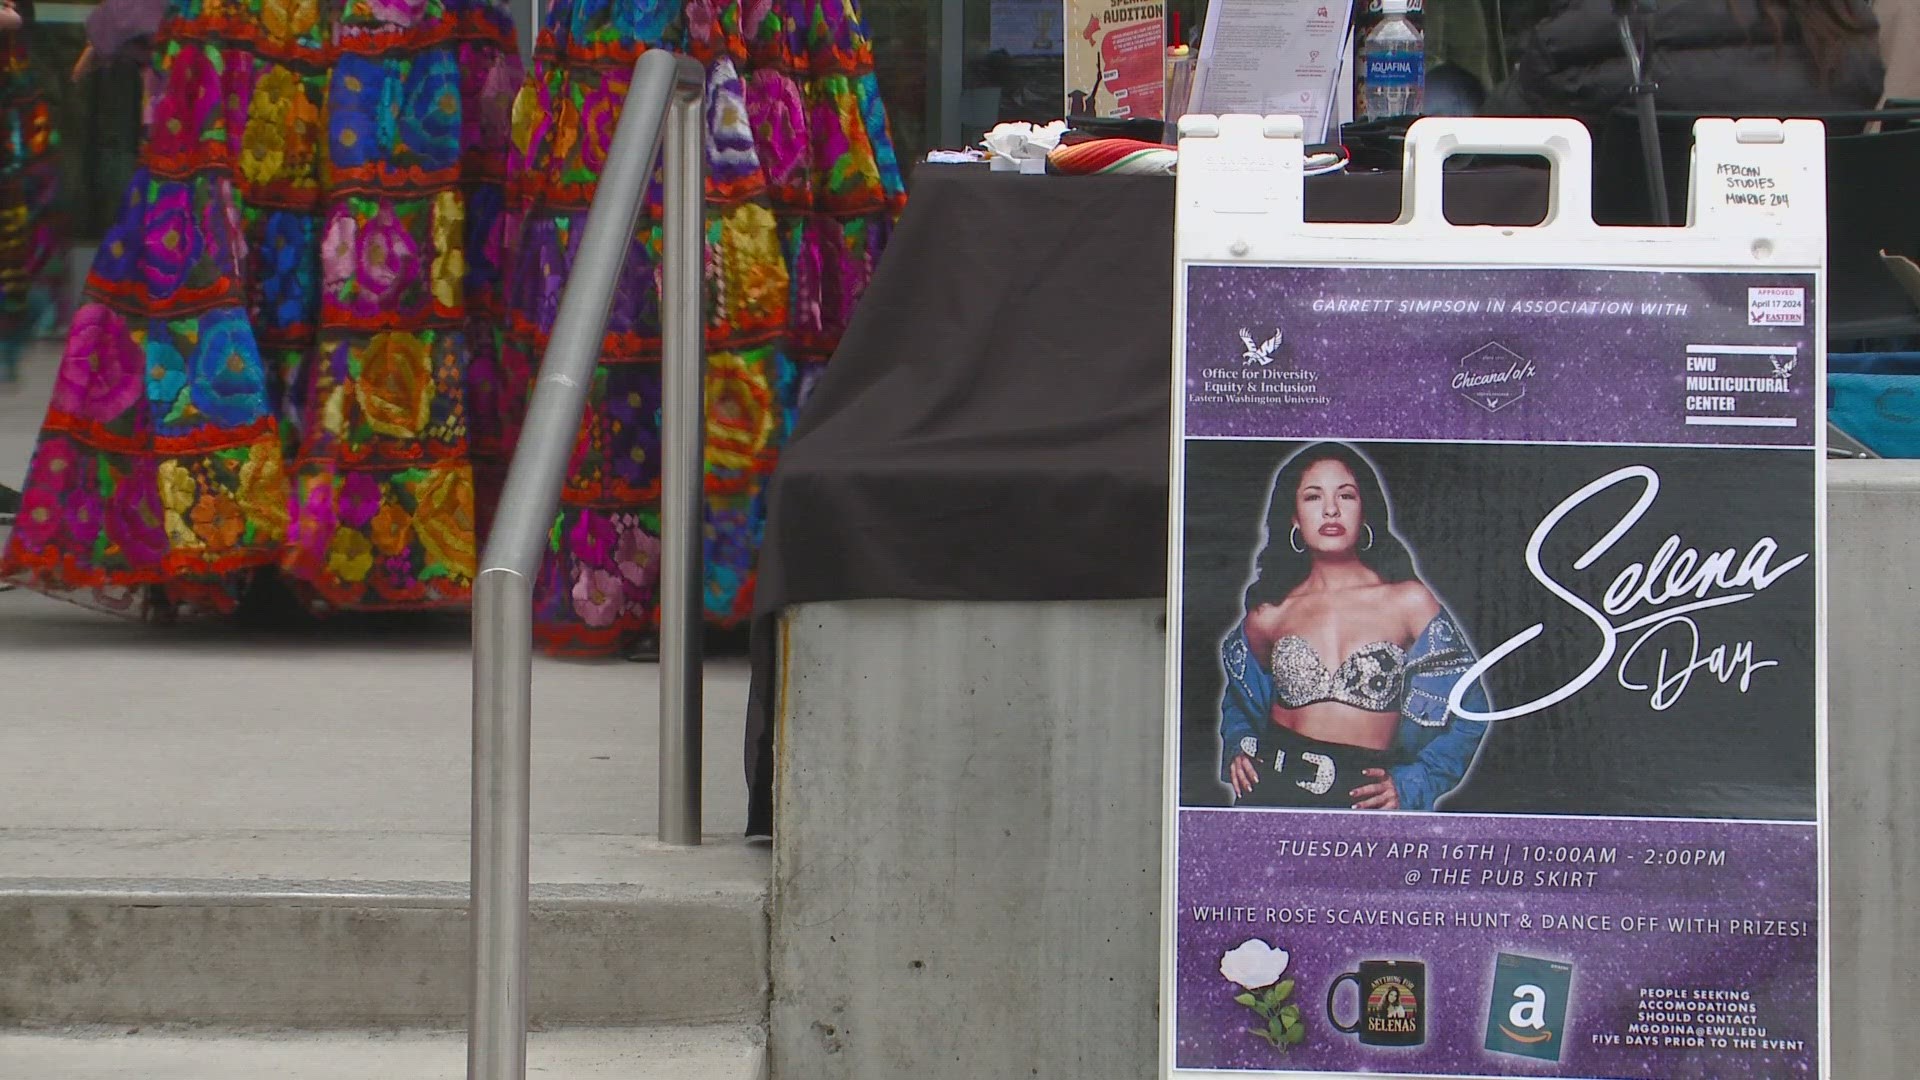 Students at Eastern are honoring Selena, as she would have been 53-years old today.